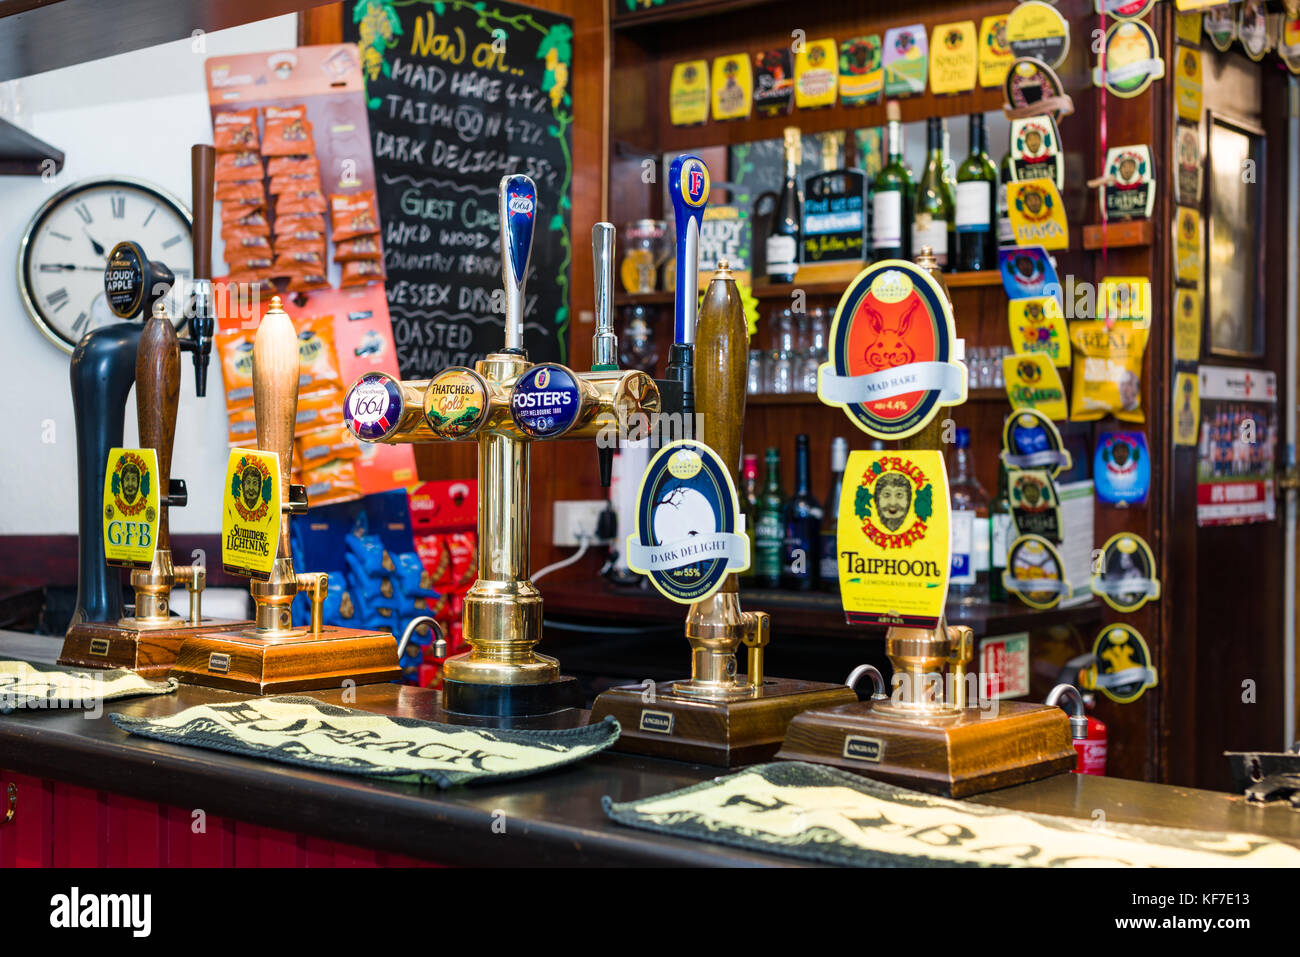 Typical pub interior showing cask ale hand pumps and back of serving area Stock Photo